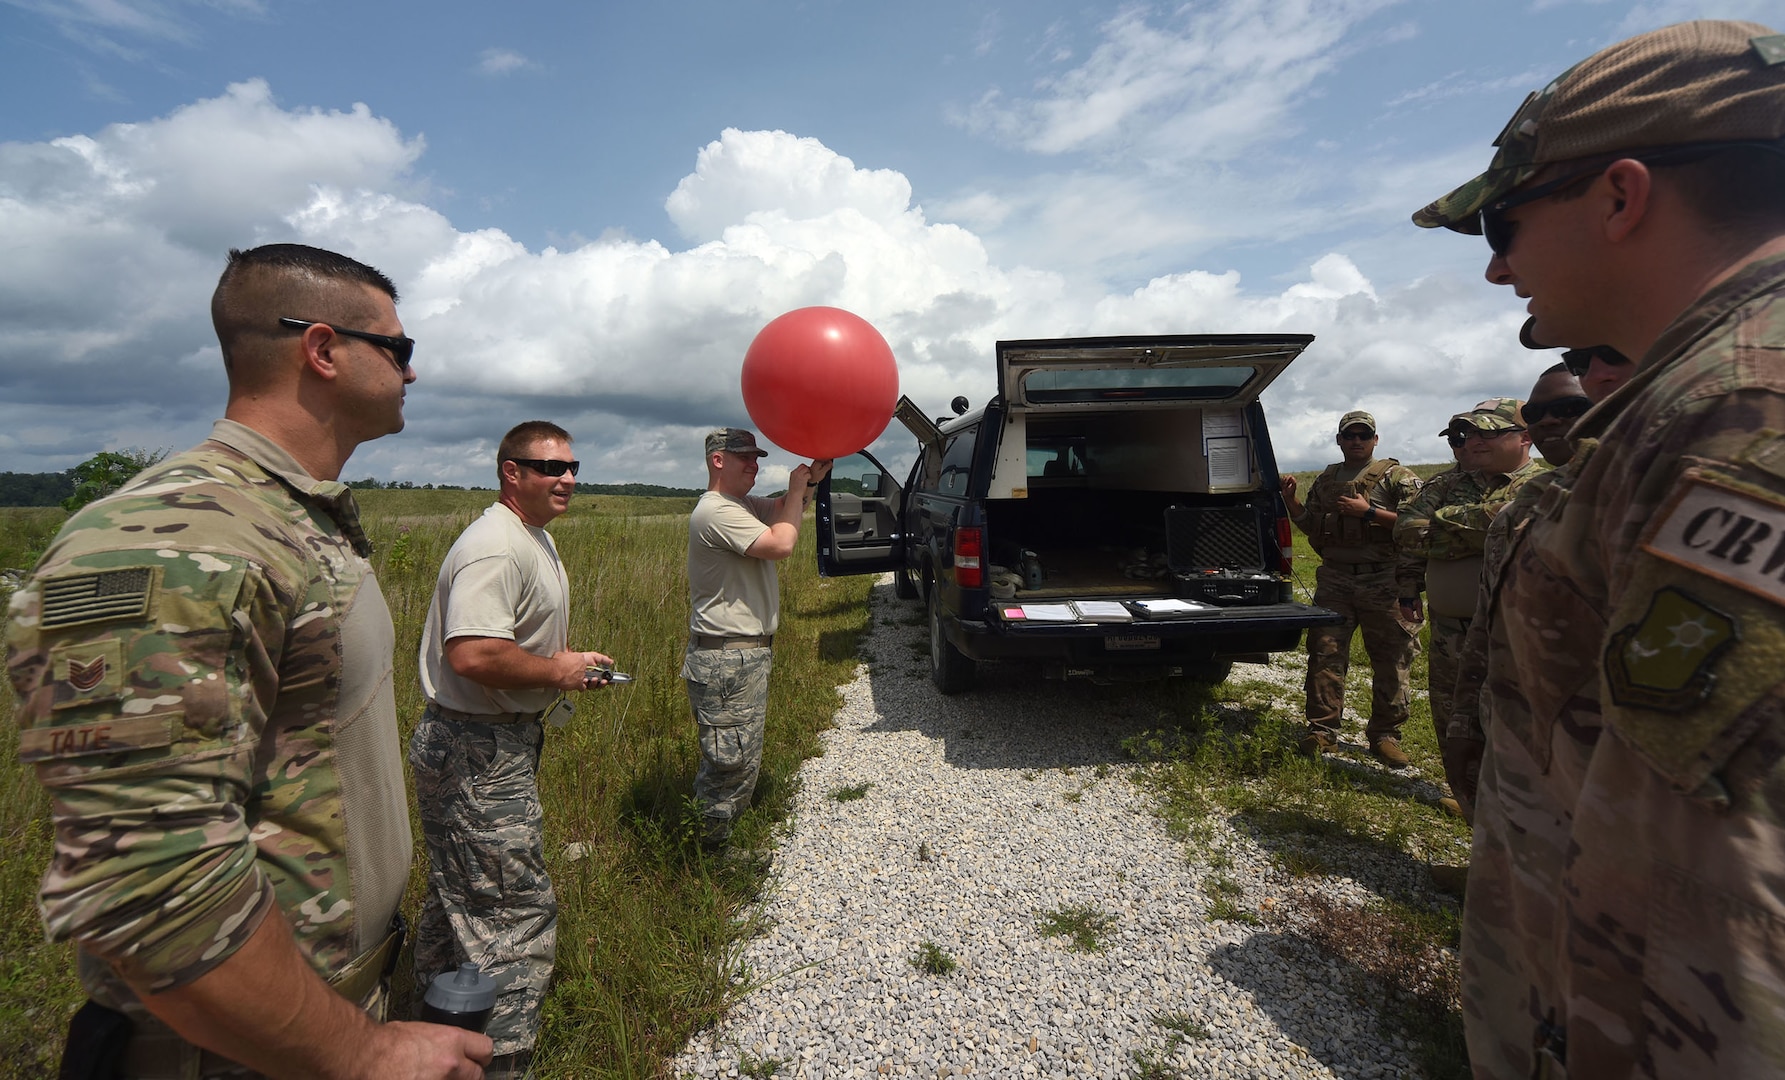 Air National Guard Airmen train 621st Contingency Response Airmen on weather balloons at Camp Branch in Logan County, W.Va., Aug. 21, 2018. The 621st CRG spent four days training with and working alongside the 130th ANG at Camp Branch practicing semi-prepared runway operations.